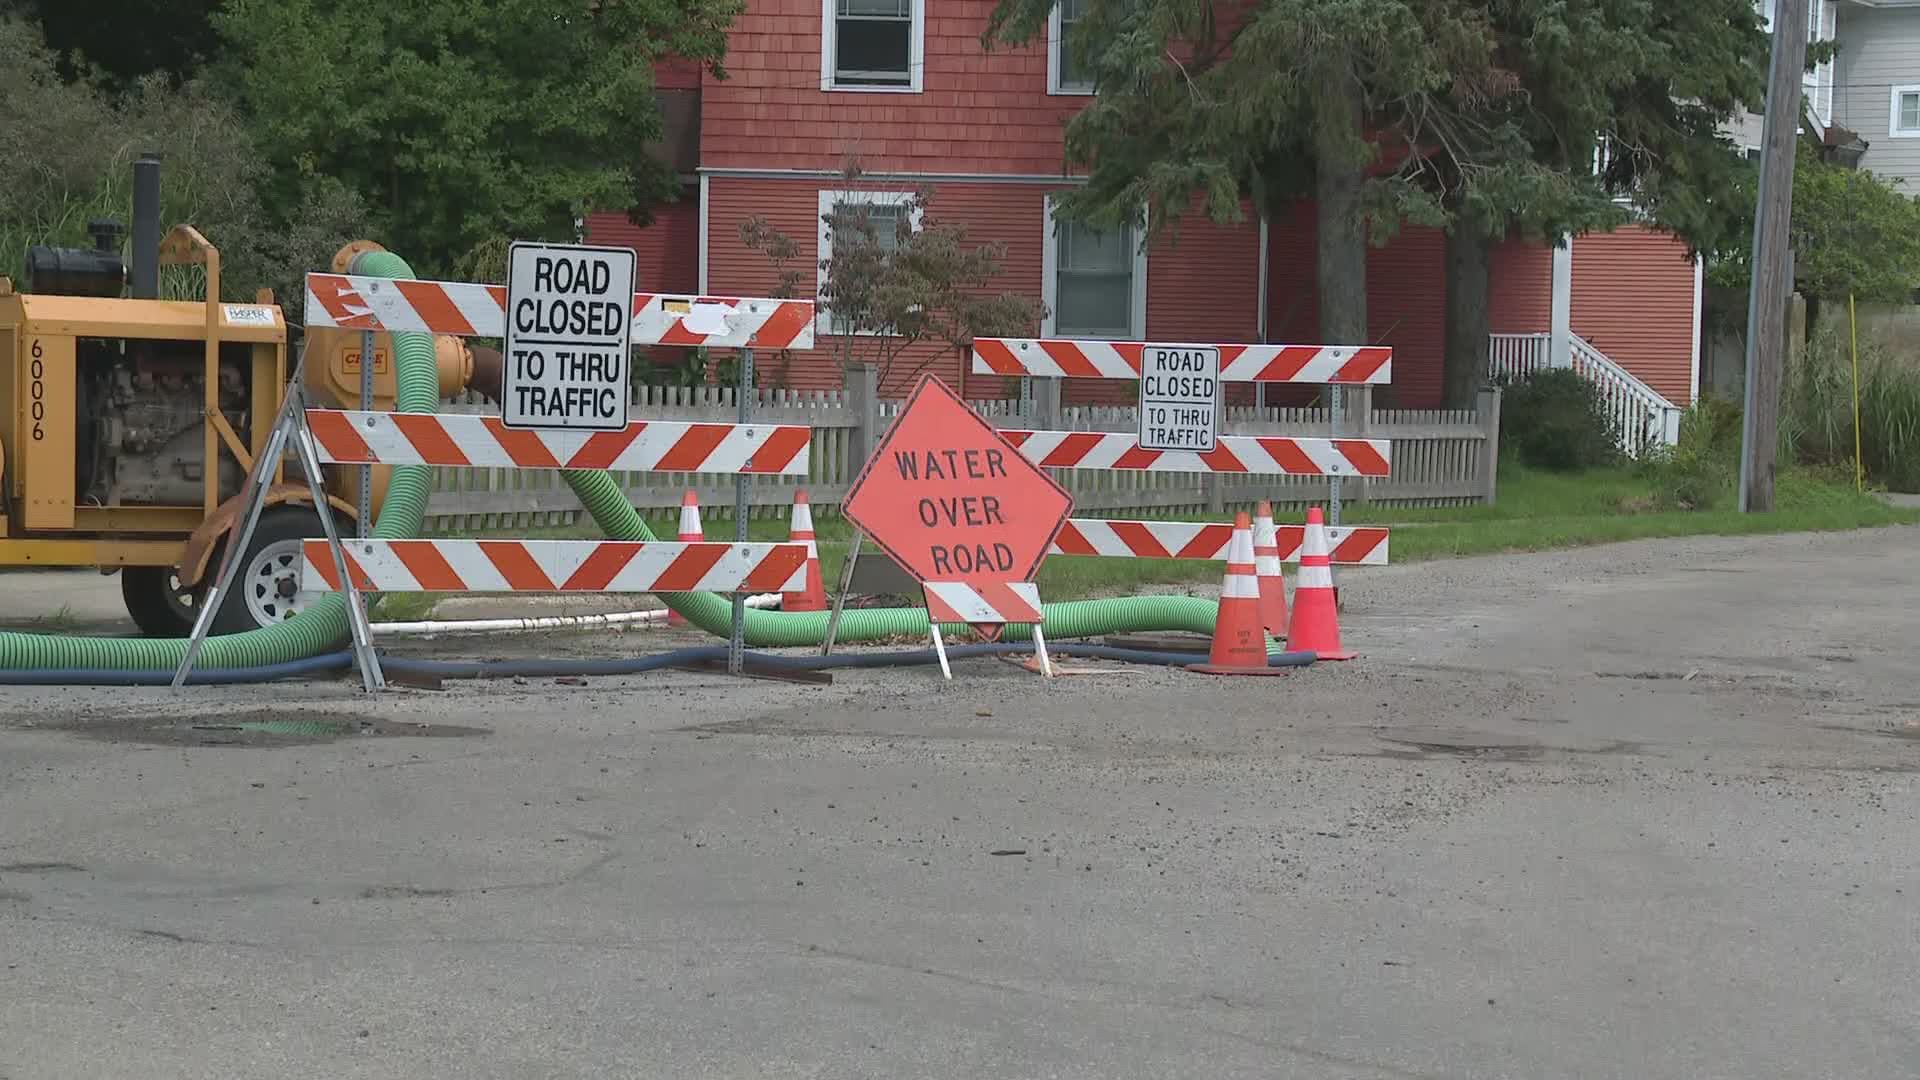 Muskegon's DPW is asking city commissioners for authorization to spent $15,000 on an engineering study of Edgewater Street.